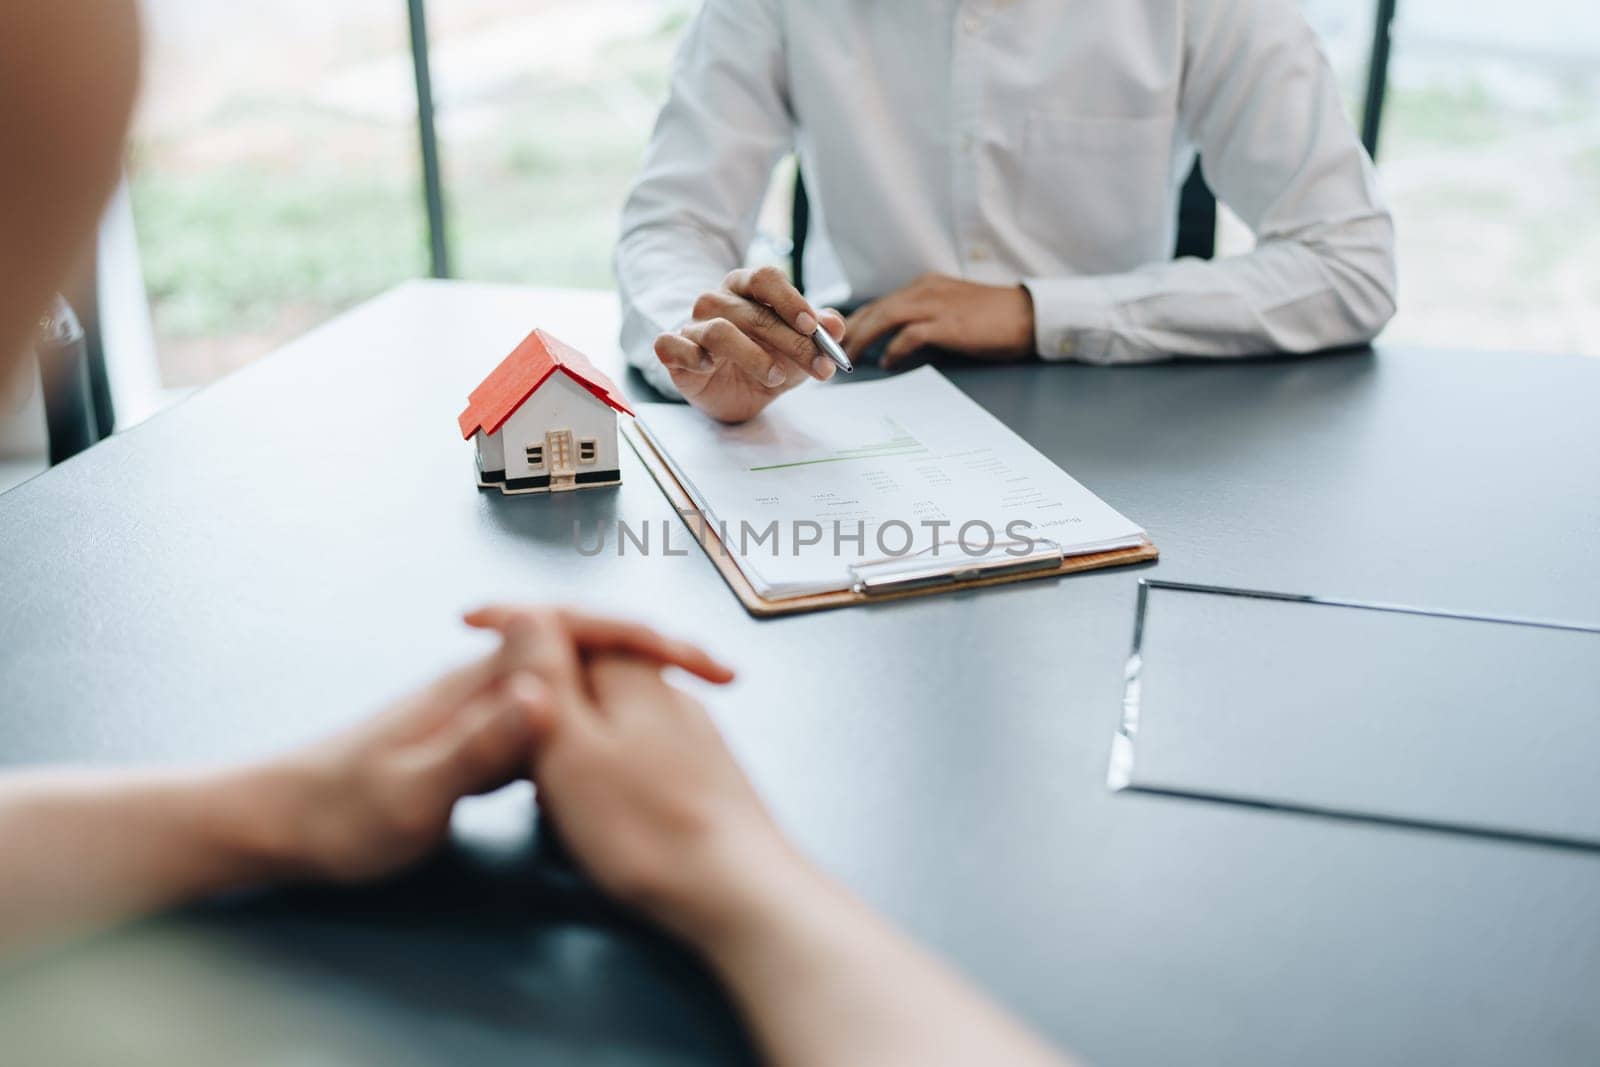 Guarantee, mortgage, agreement, contract, signed, real estate agent pointing to documents for customers to read the agreement before signing important documents.